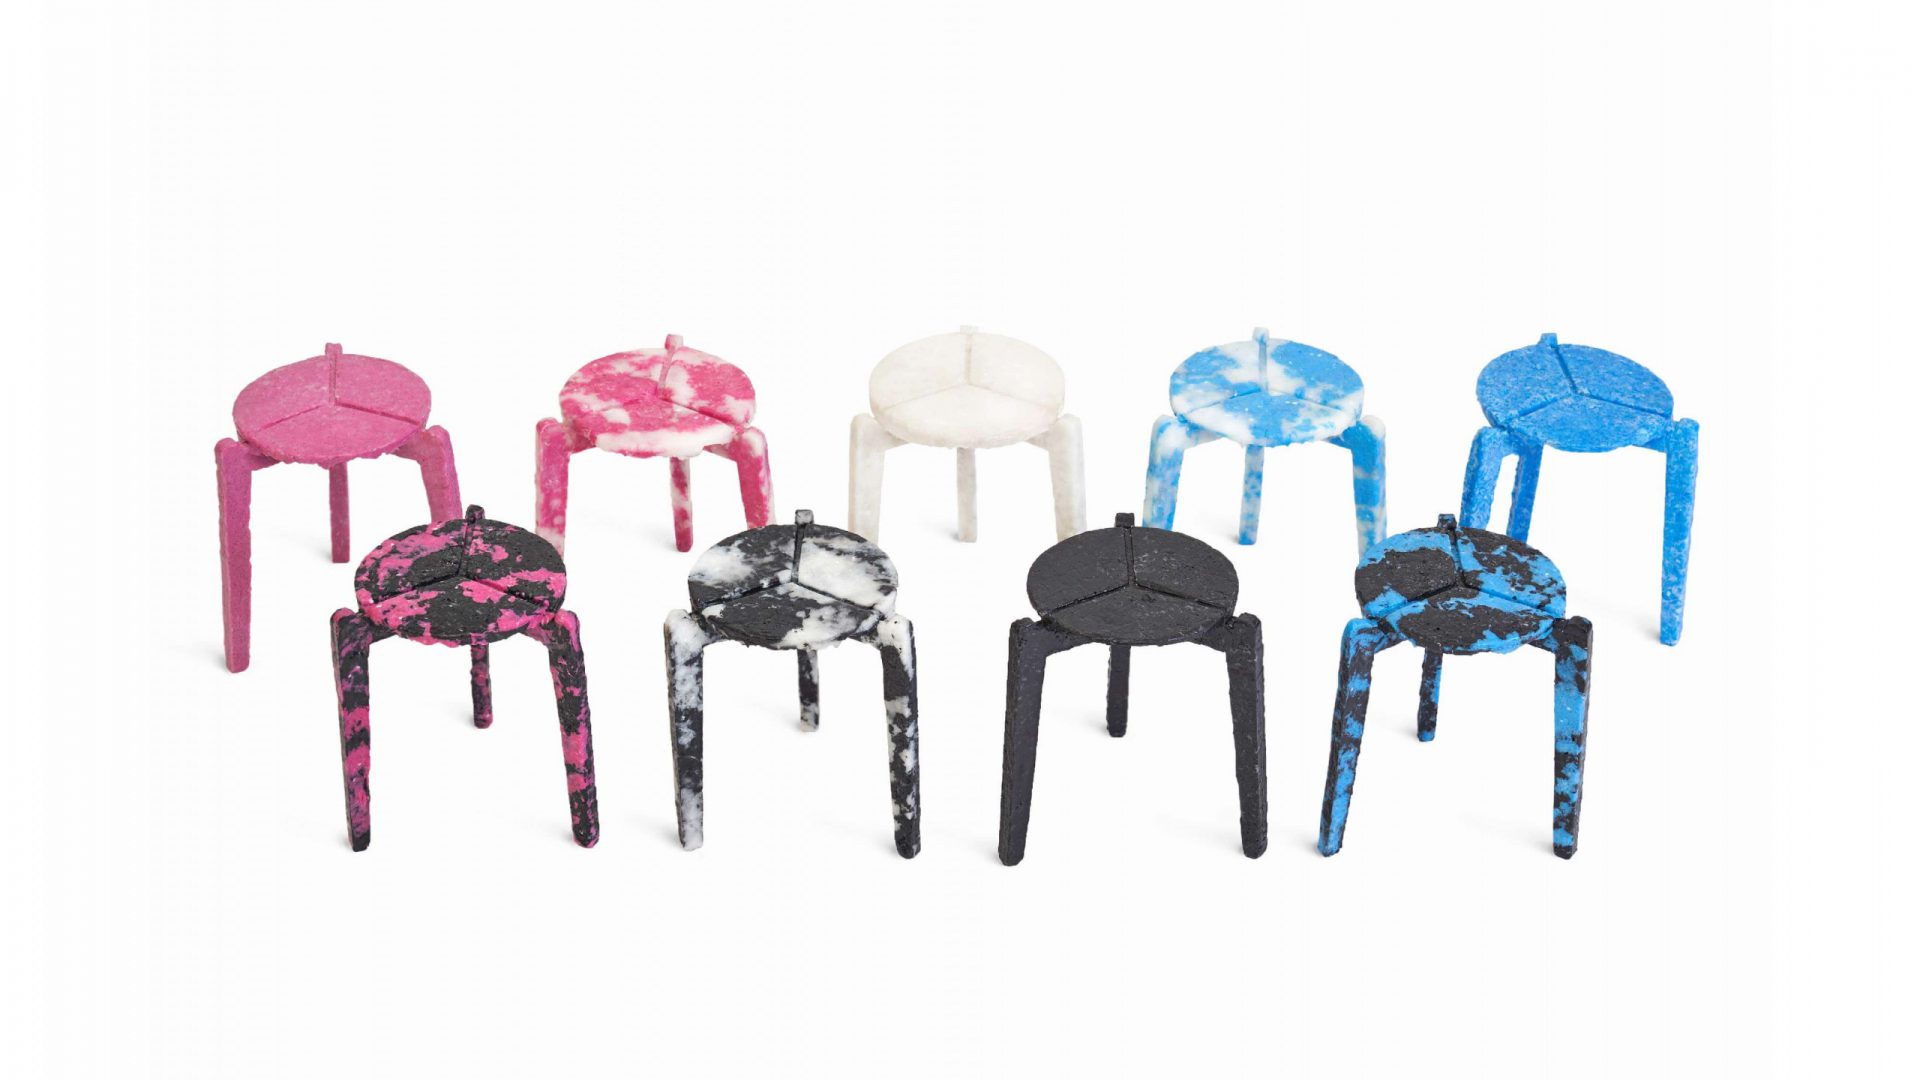 Haneul Kim fashions plastic stool from 1,500 discarded face masks